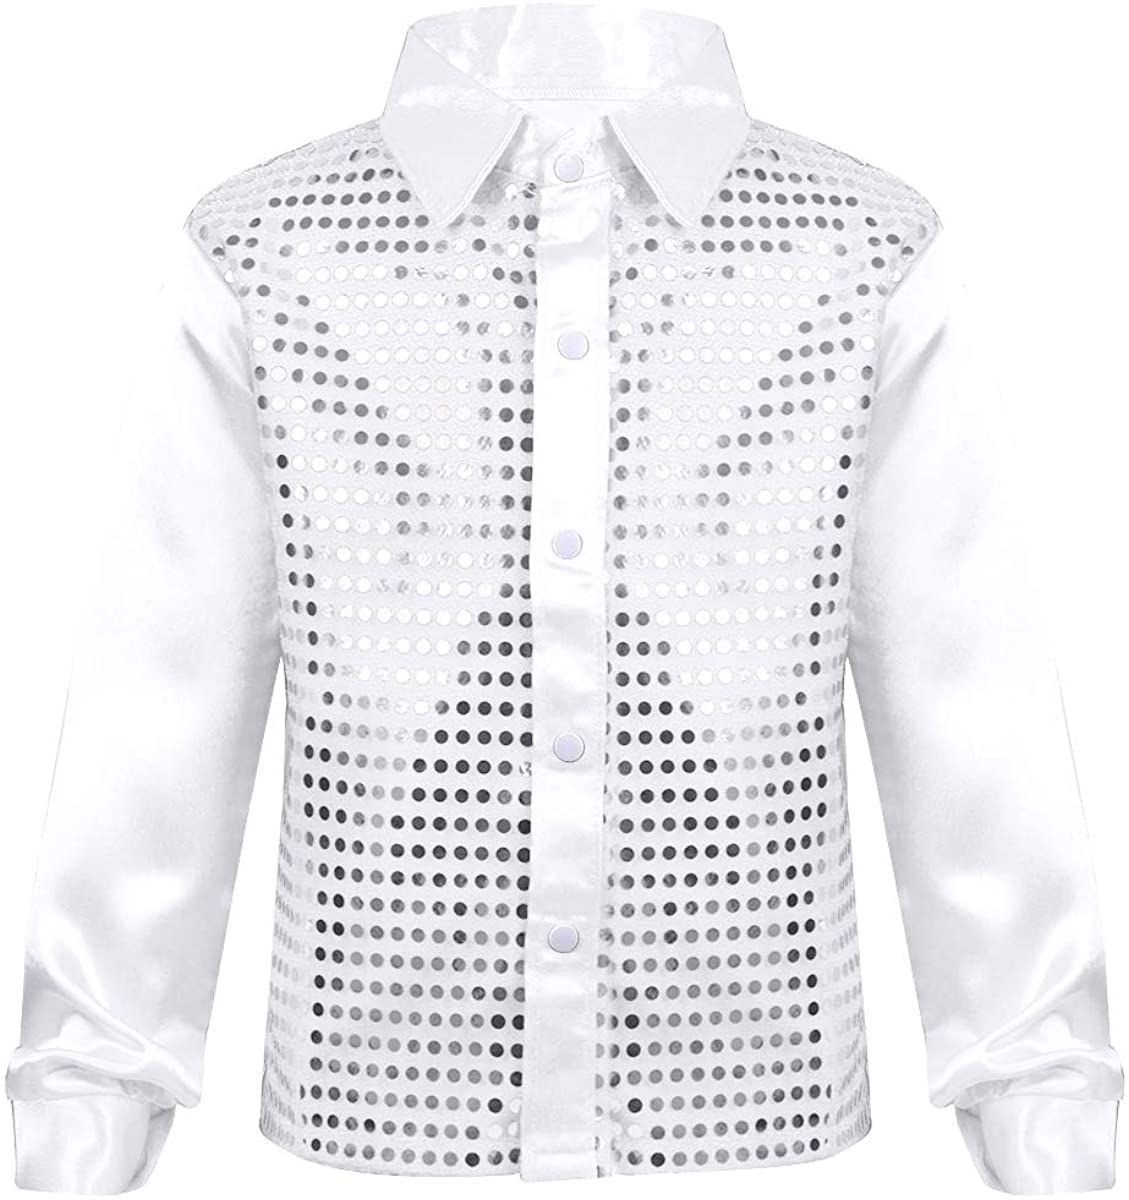 iEFiEL Kids Boys Teens Sequins Long Sleeve Shirt Party for Choir Jazz Dance Stage Performance Wedding Dance Costumes 